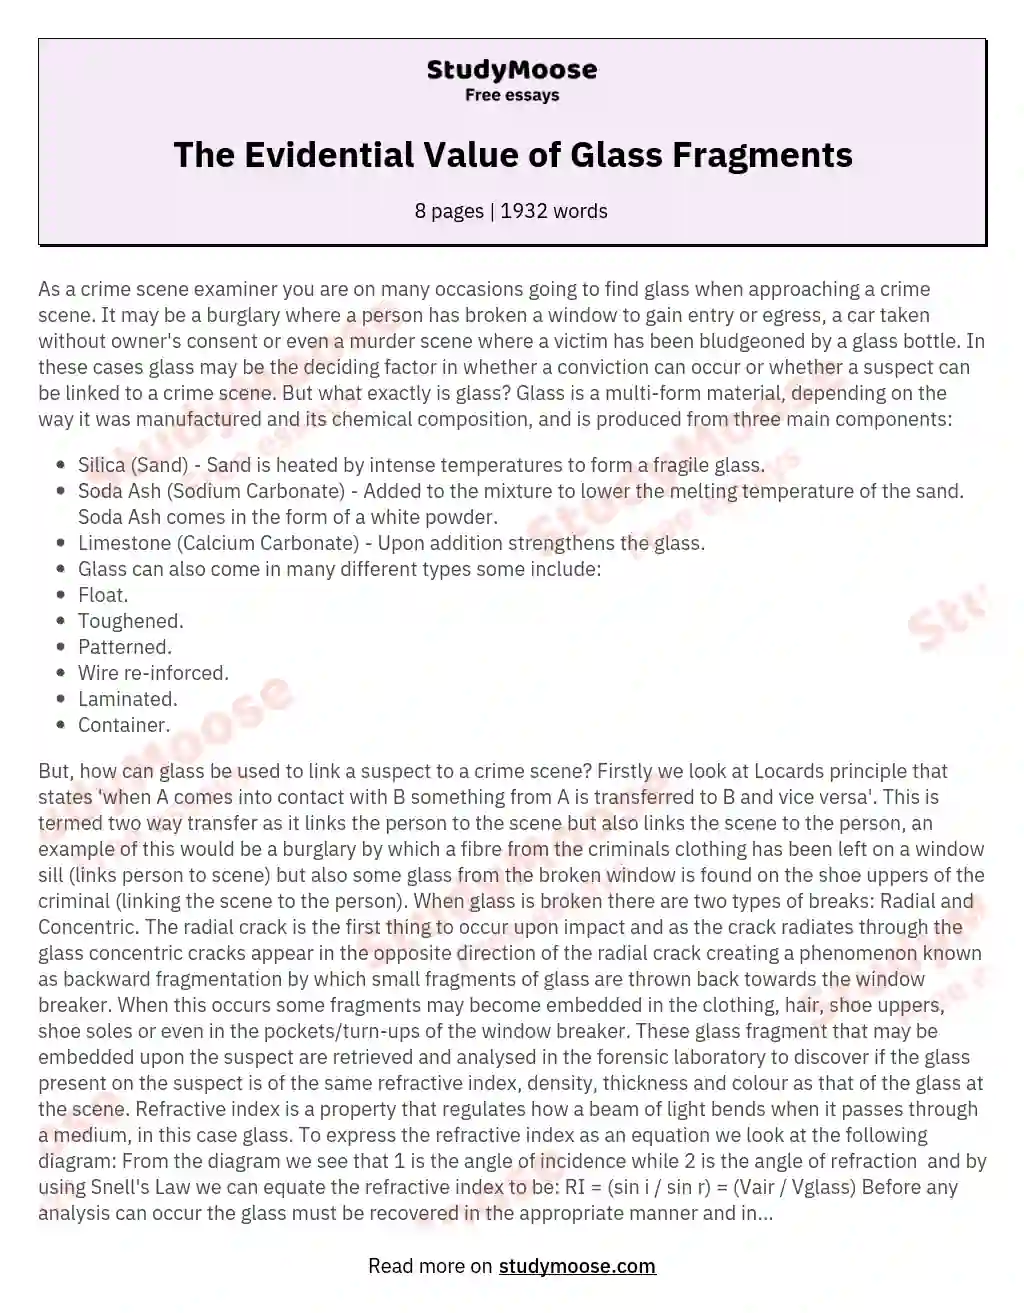 The Evidential Value of Glass Fragments essay